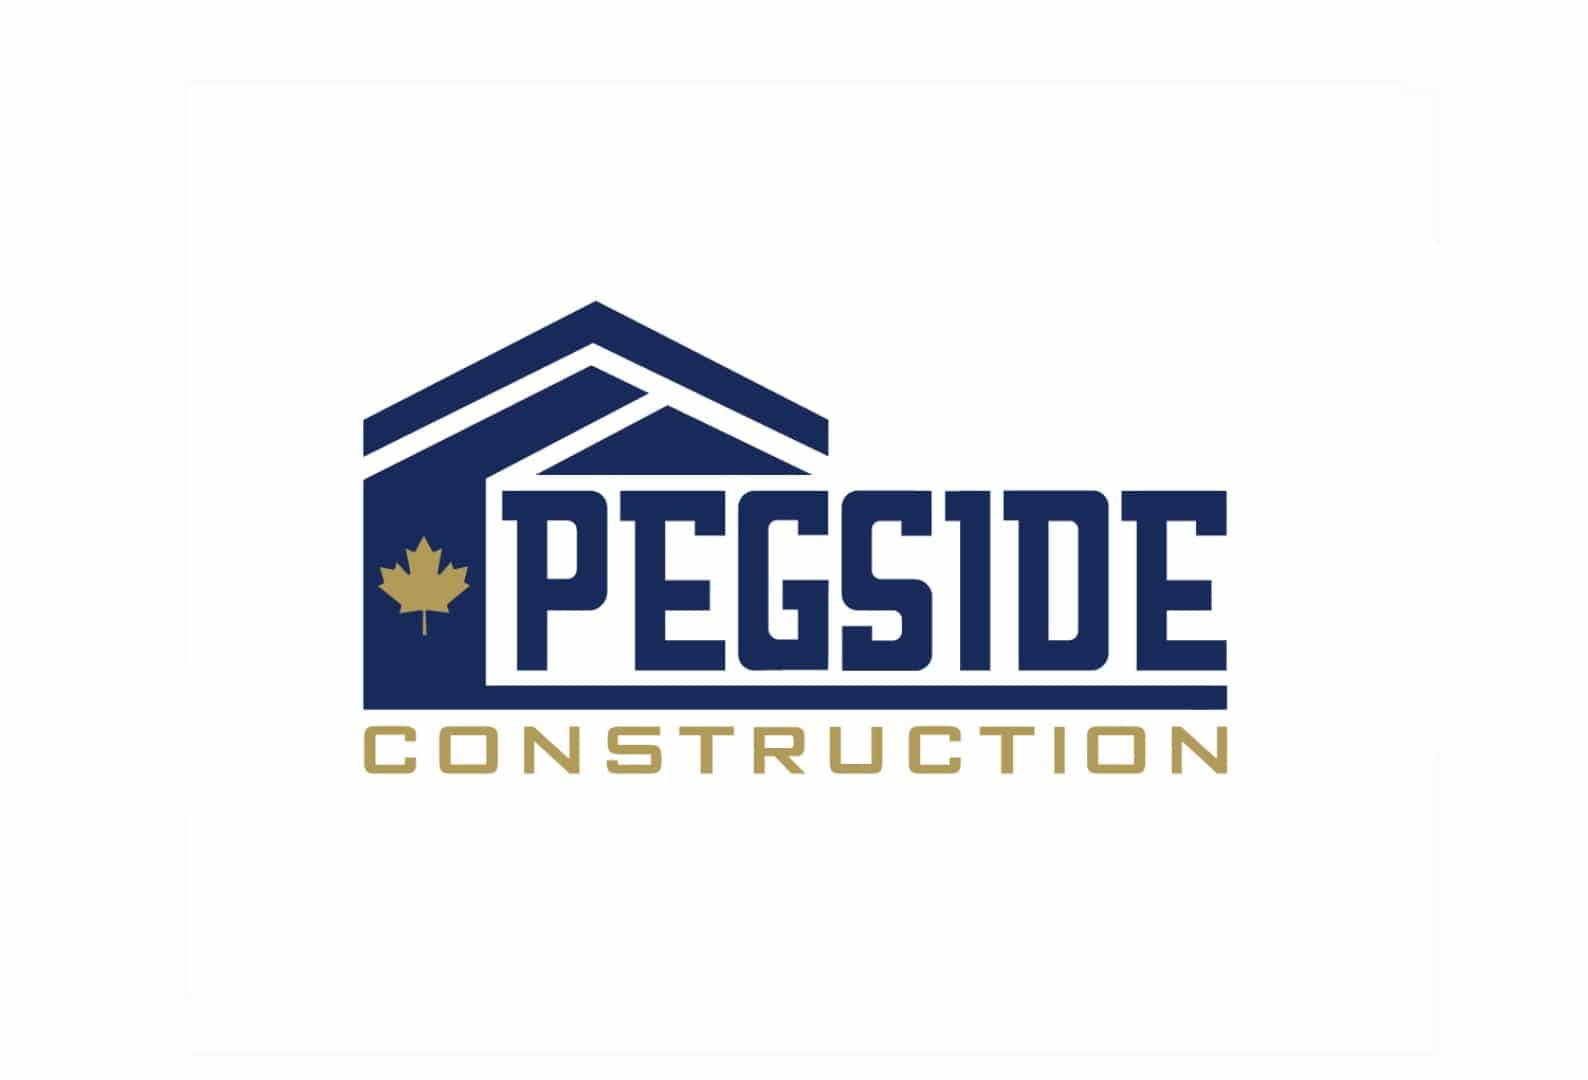 Pegside Construction is seeking carpenters in Canada